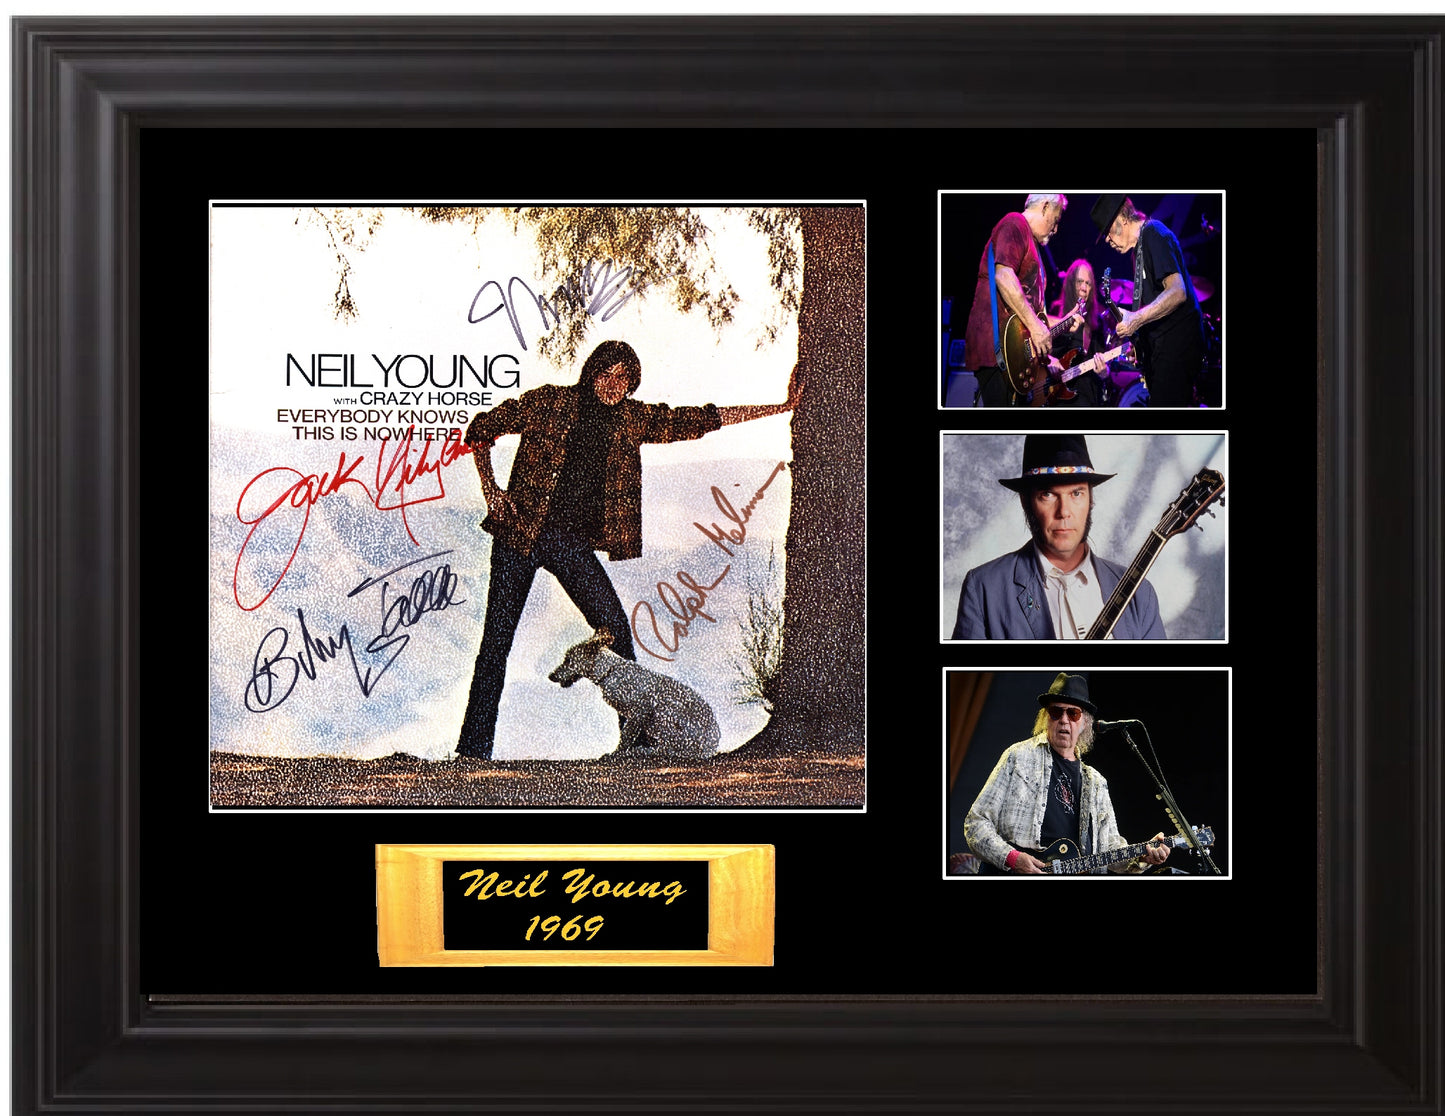 Neil Young Crazy Horse Band Autographed - Zion Graphic Collectibles